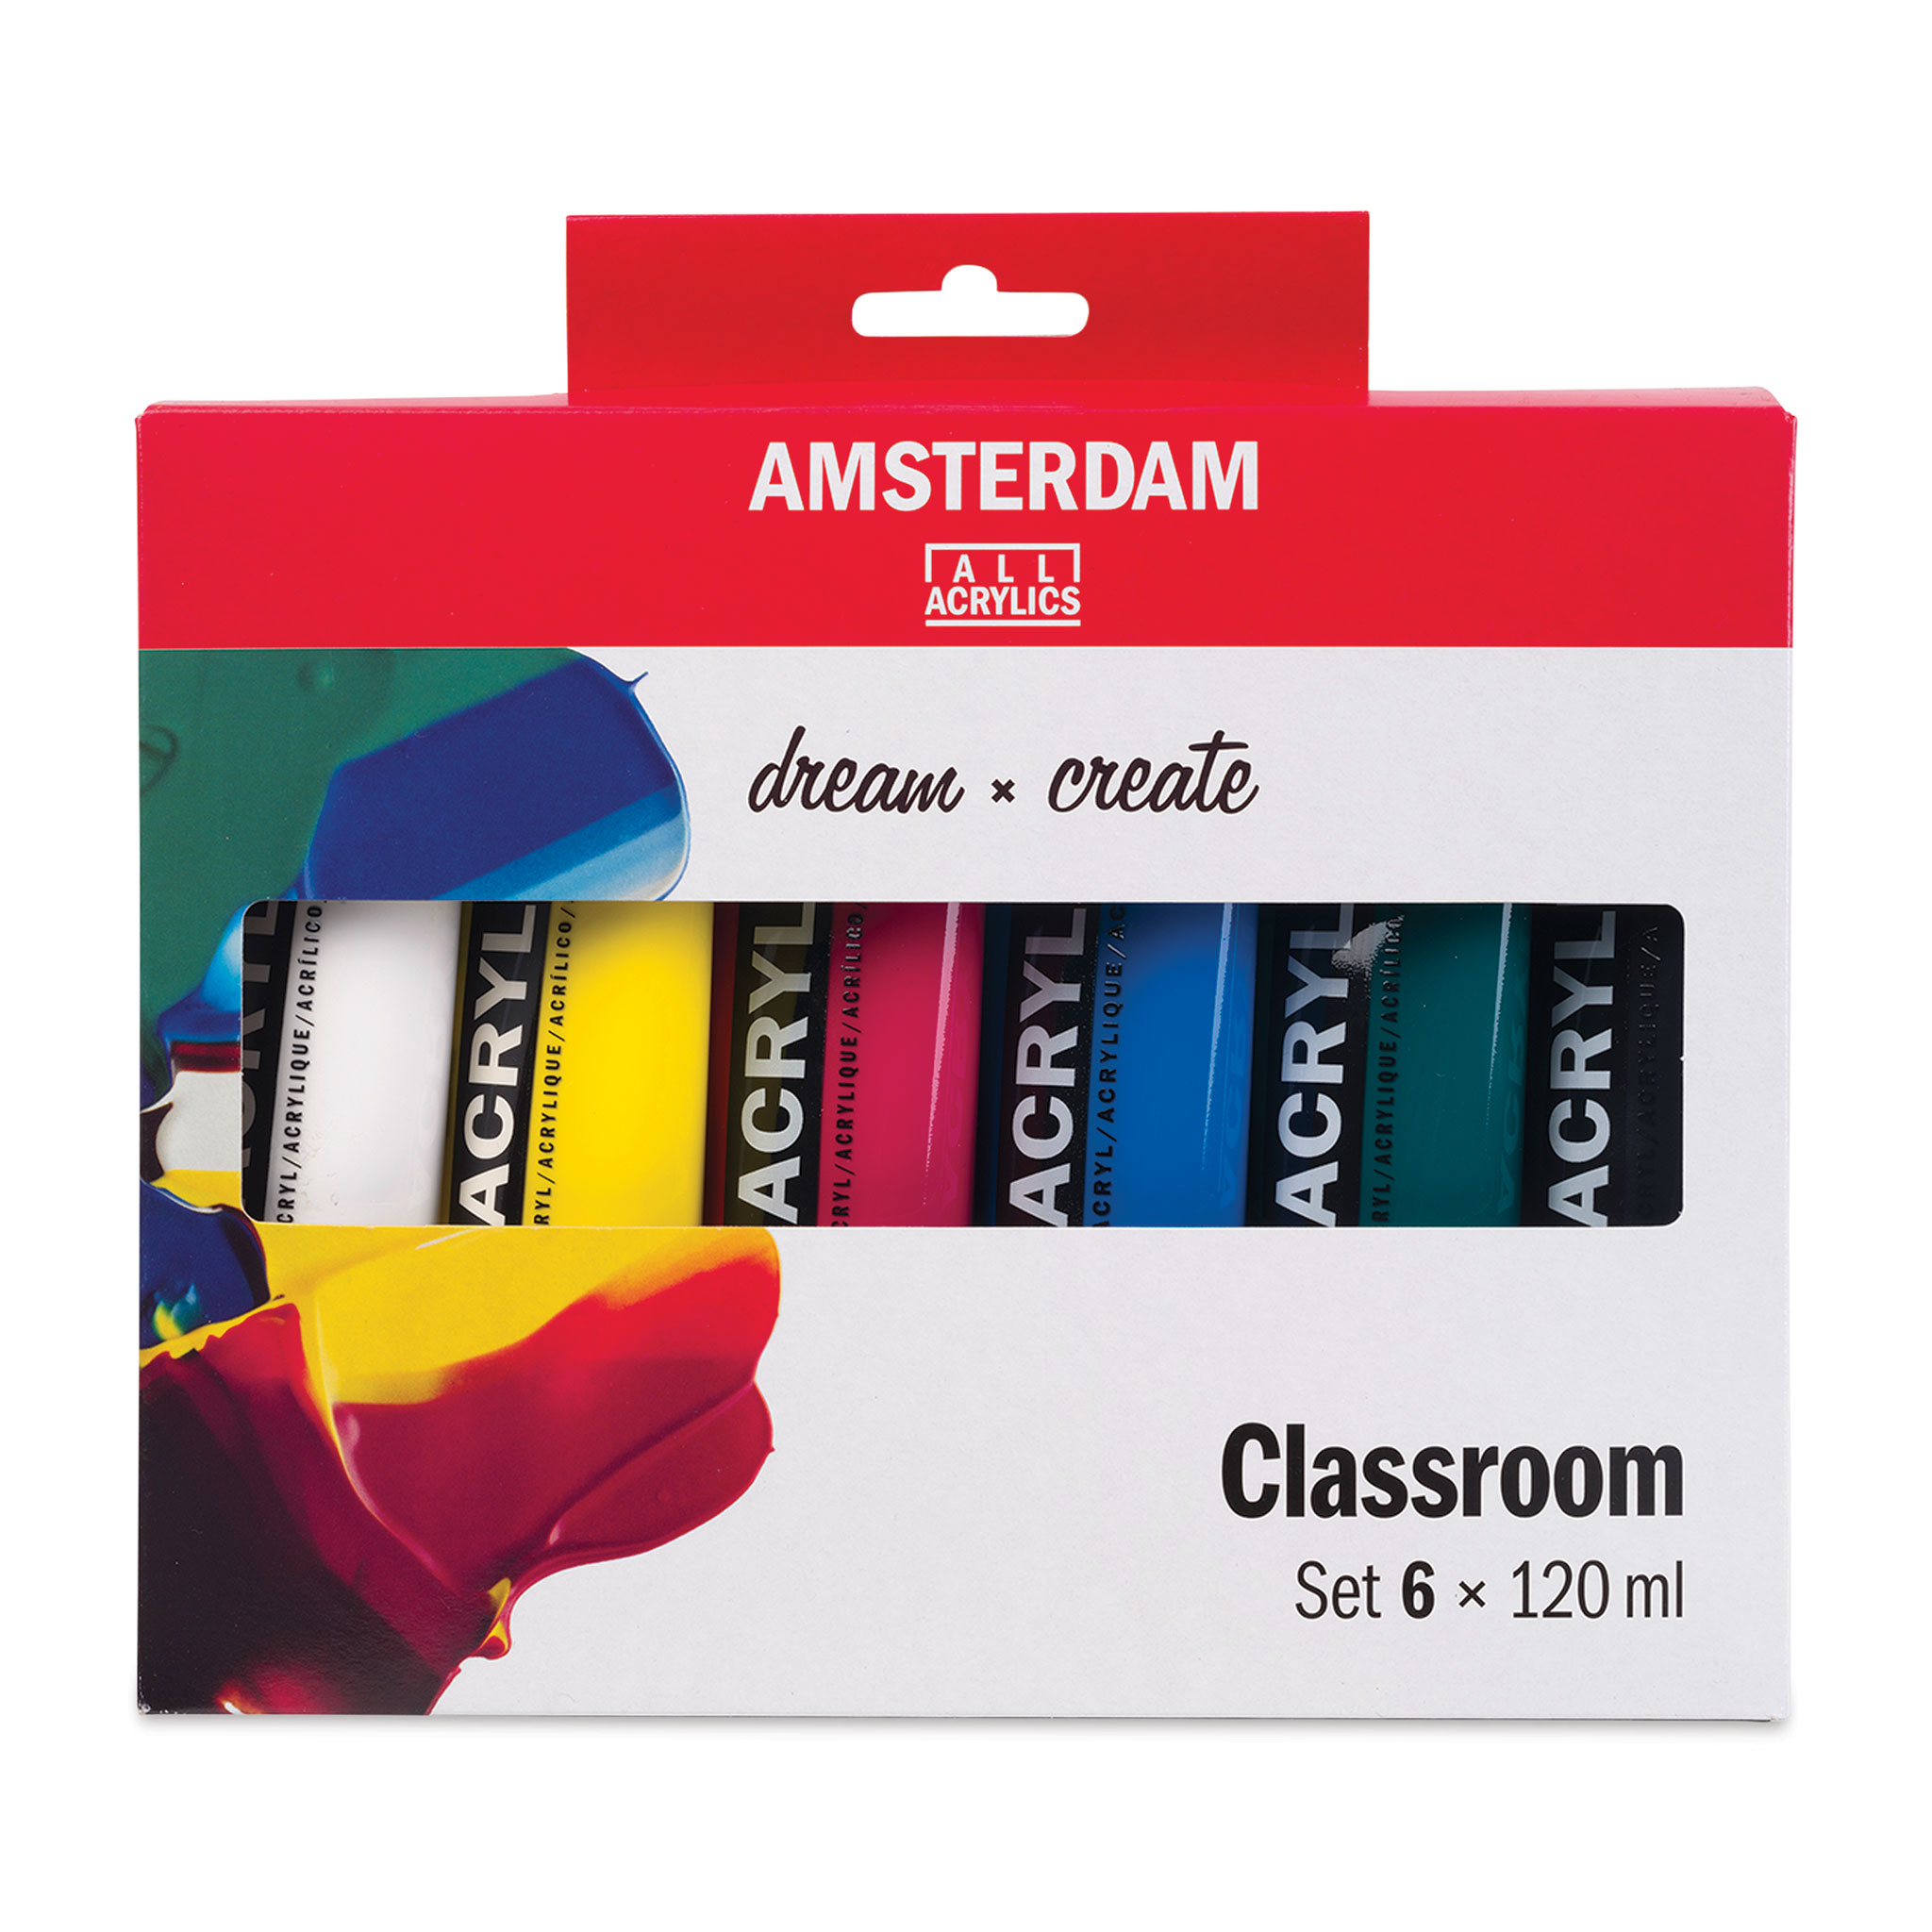 Amsterdam Standard Series Acrylics - Set of 5, Primary Colors, 120 mL, Tubes with 3 Nozzles